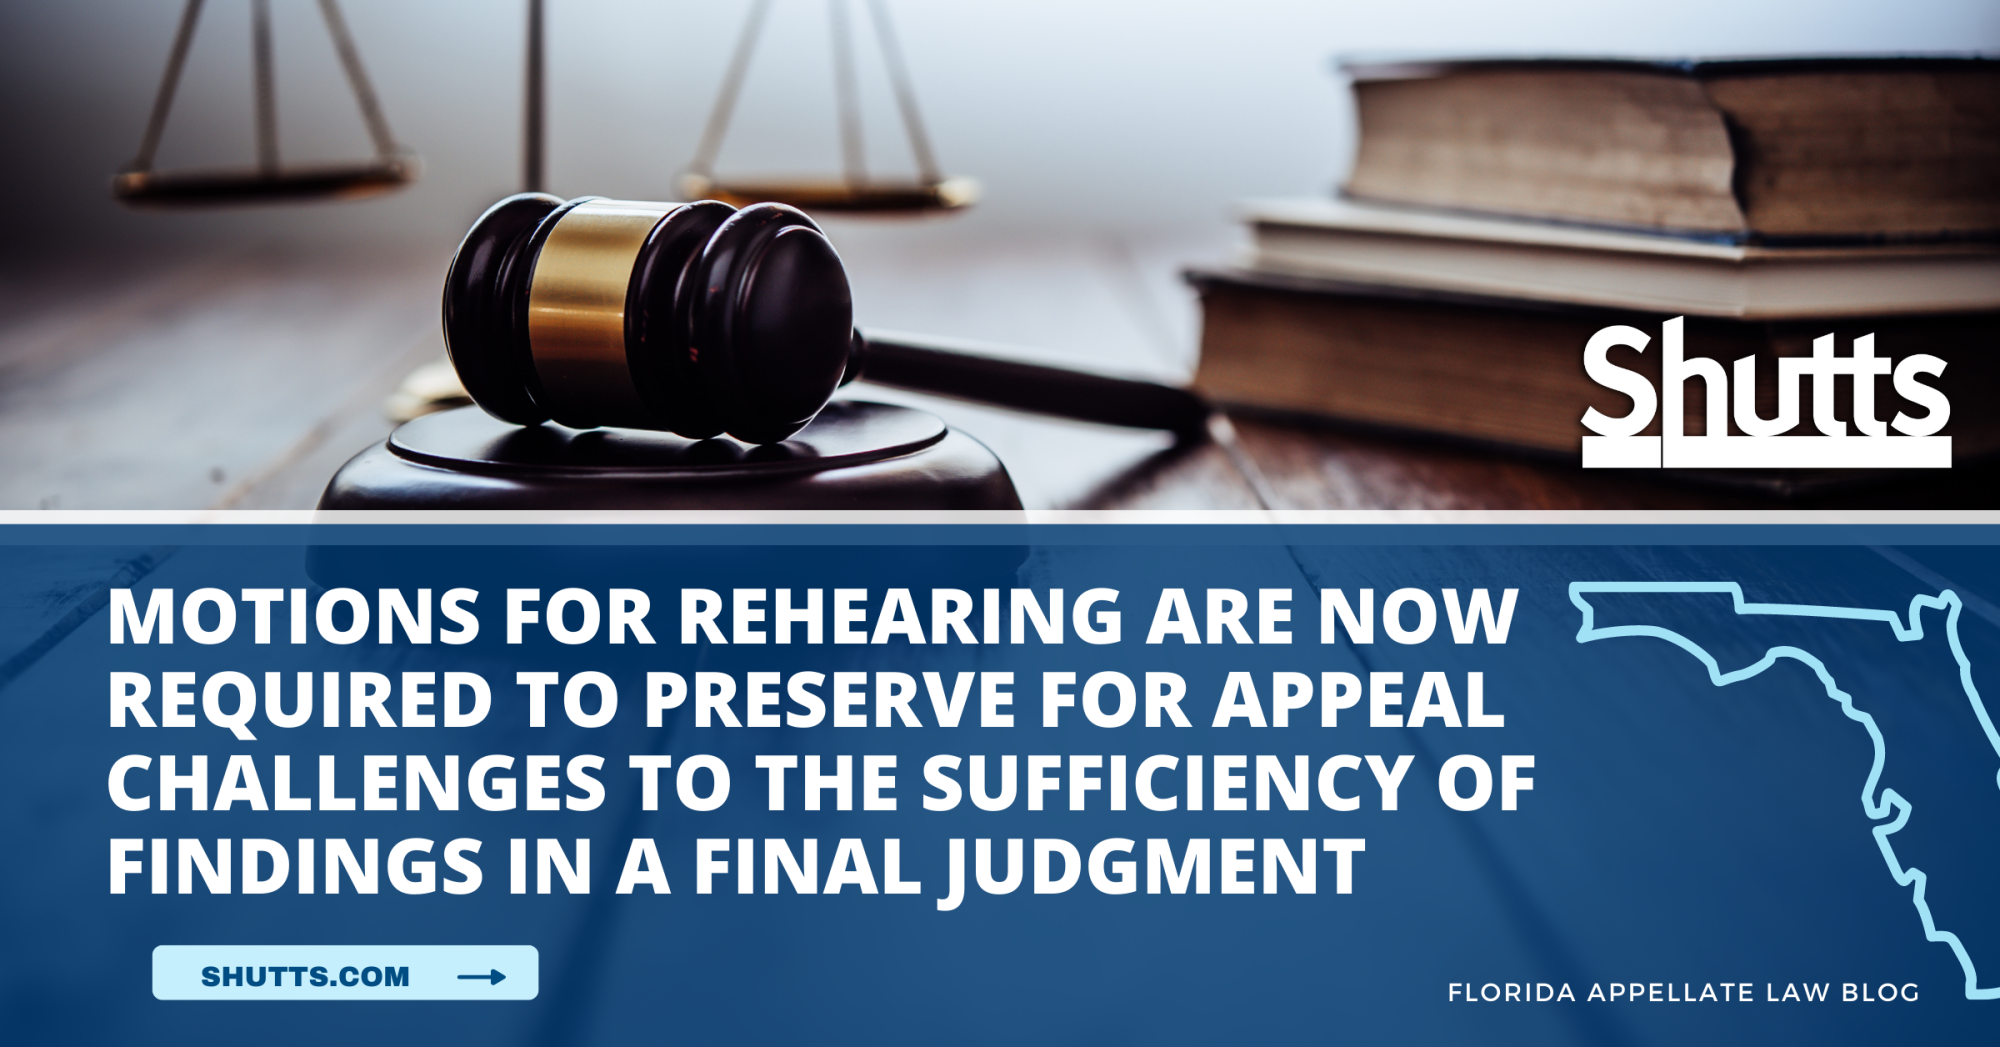 Motions for Rehearing Are Now Required to Preserve for Appeal Challenges to the Sufficiency of Findings in a Final Judgment